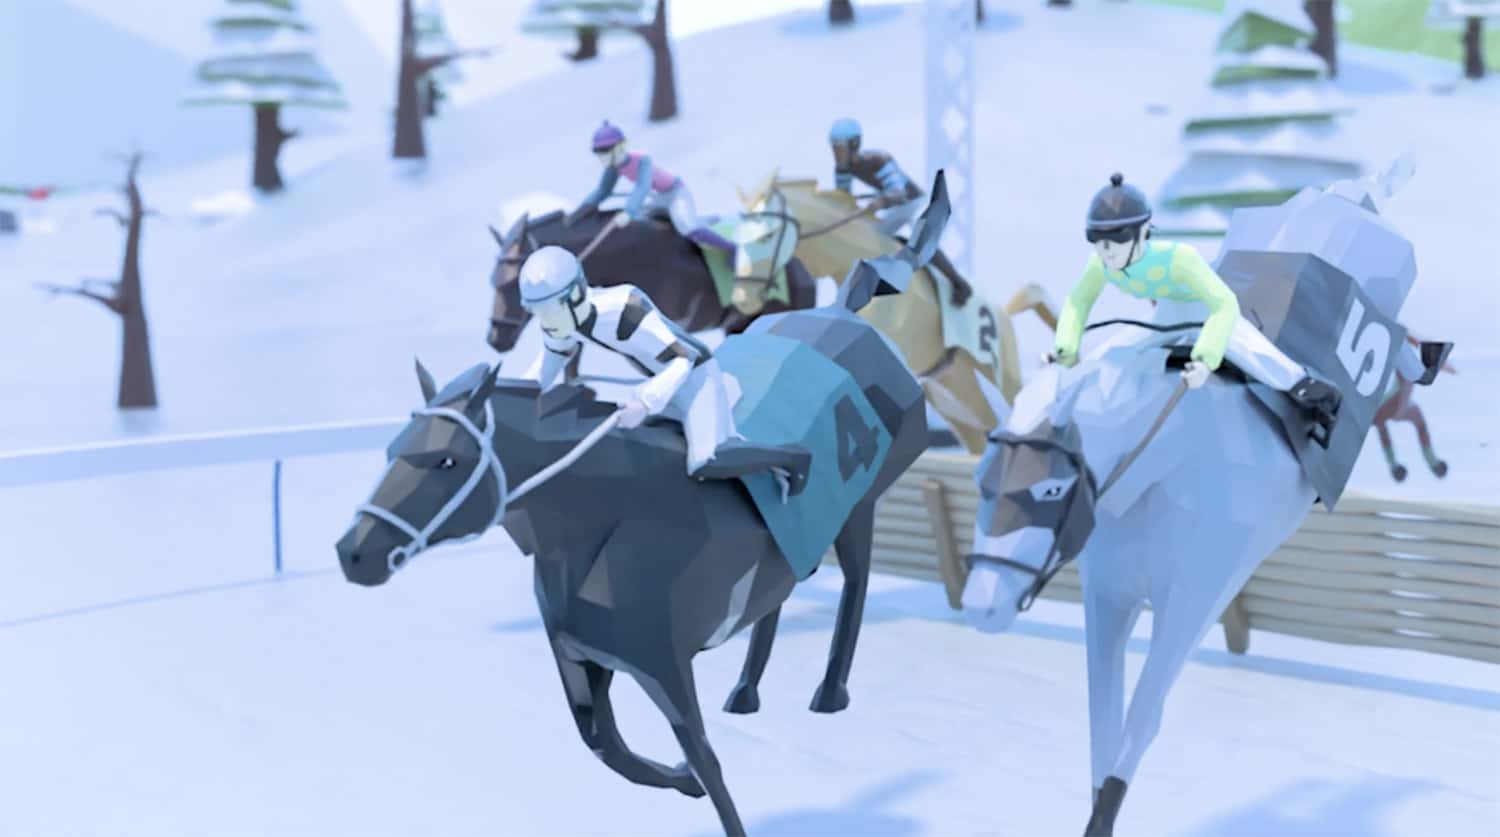 Image At The Races | TeambuildingGuide